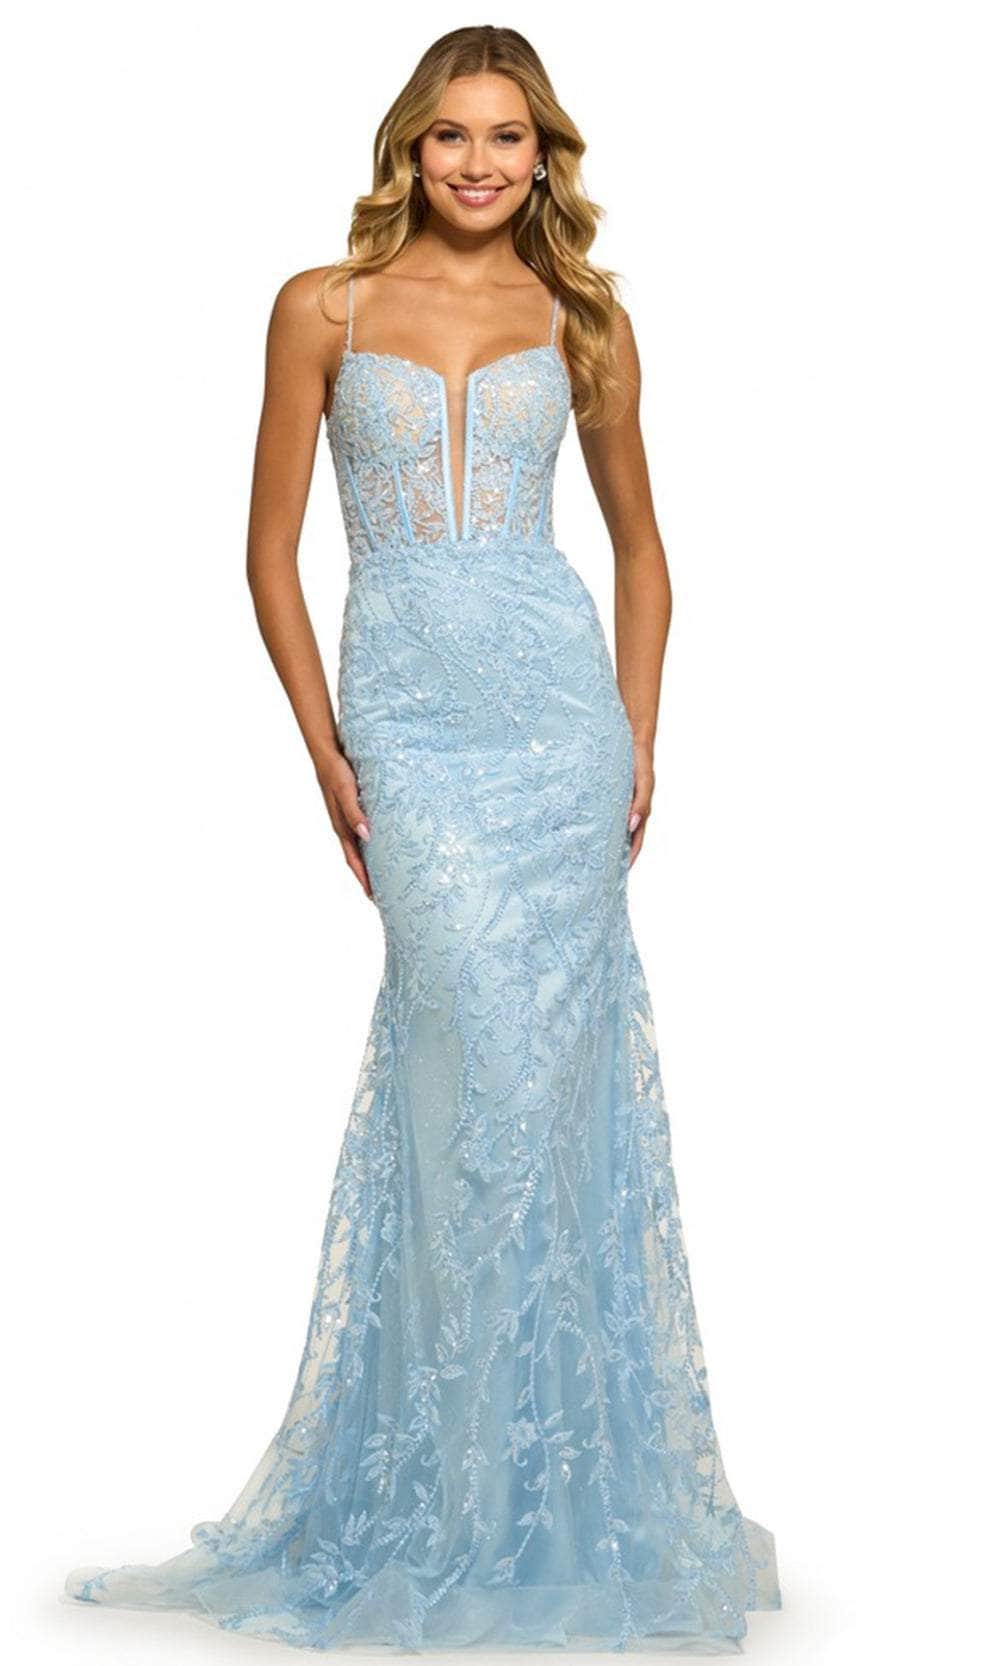 Image of Sherri Hill 55526 - Sleeveless Lace-Up Back Prom Gown